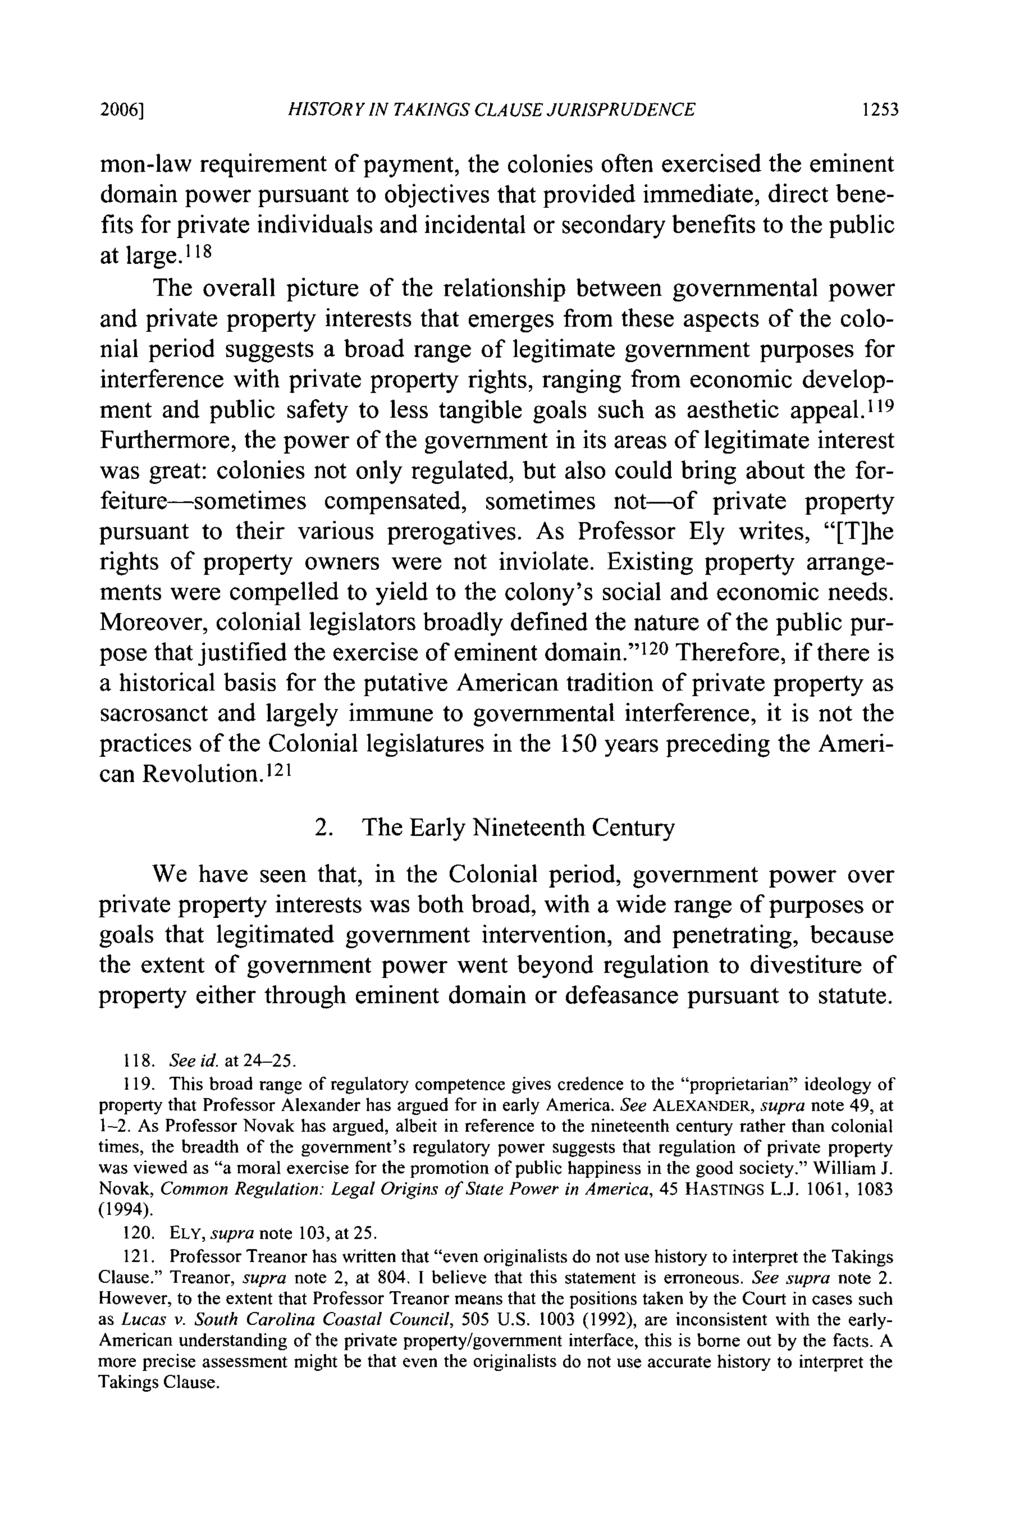 2006] HISTOR Y IN TAKINGS CLA USE JURISPRUDENCE mon-law requirement of payment, the colonies often exercised the eminent domain power pursuant to objectives that provided immediate, direct benefits